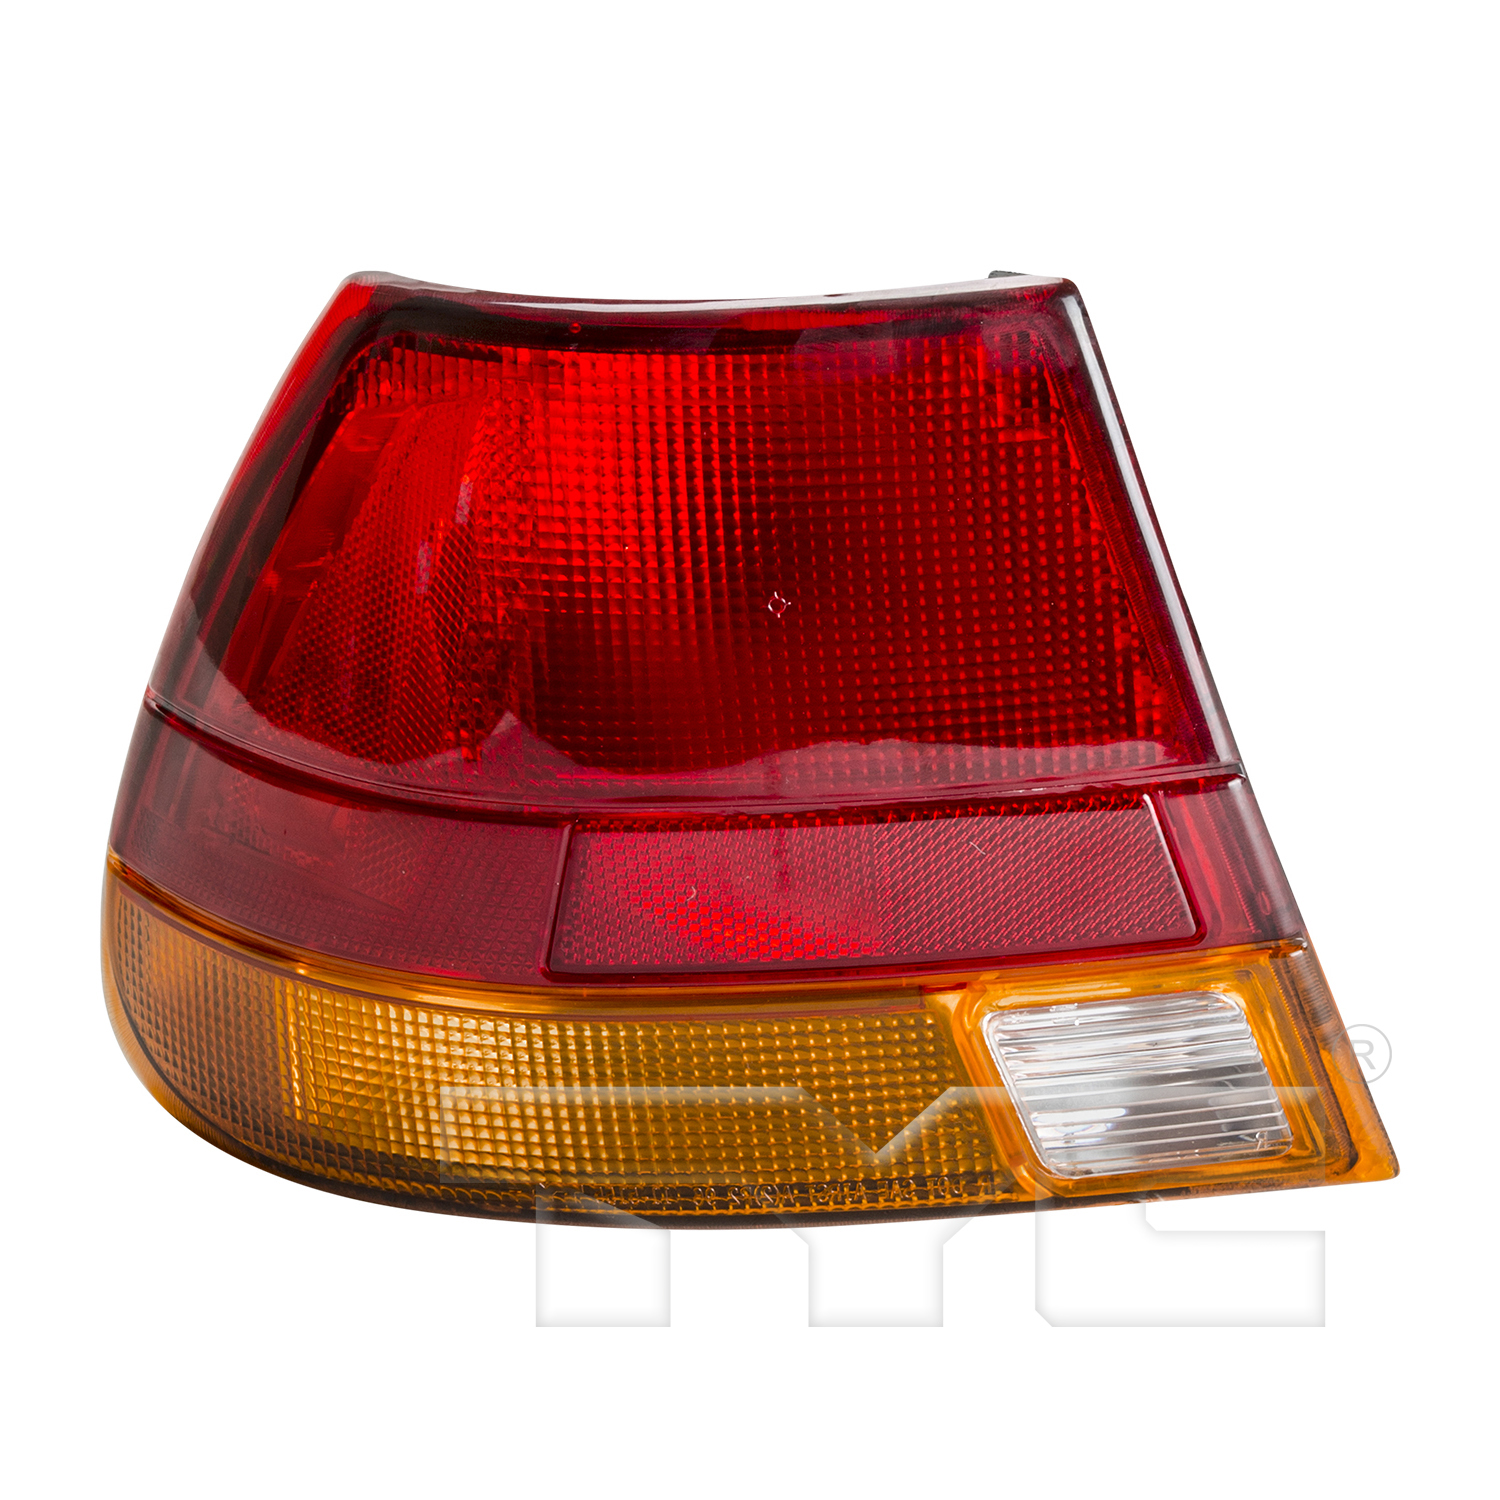 Aftermarket TAILLIGHTS for SATURN - SL2, SL2,97-99,LT Taillamp lens/housing